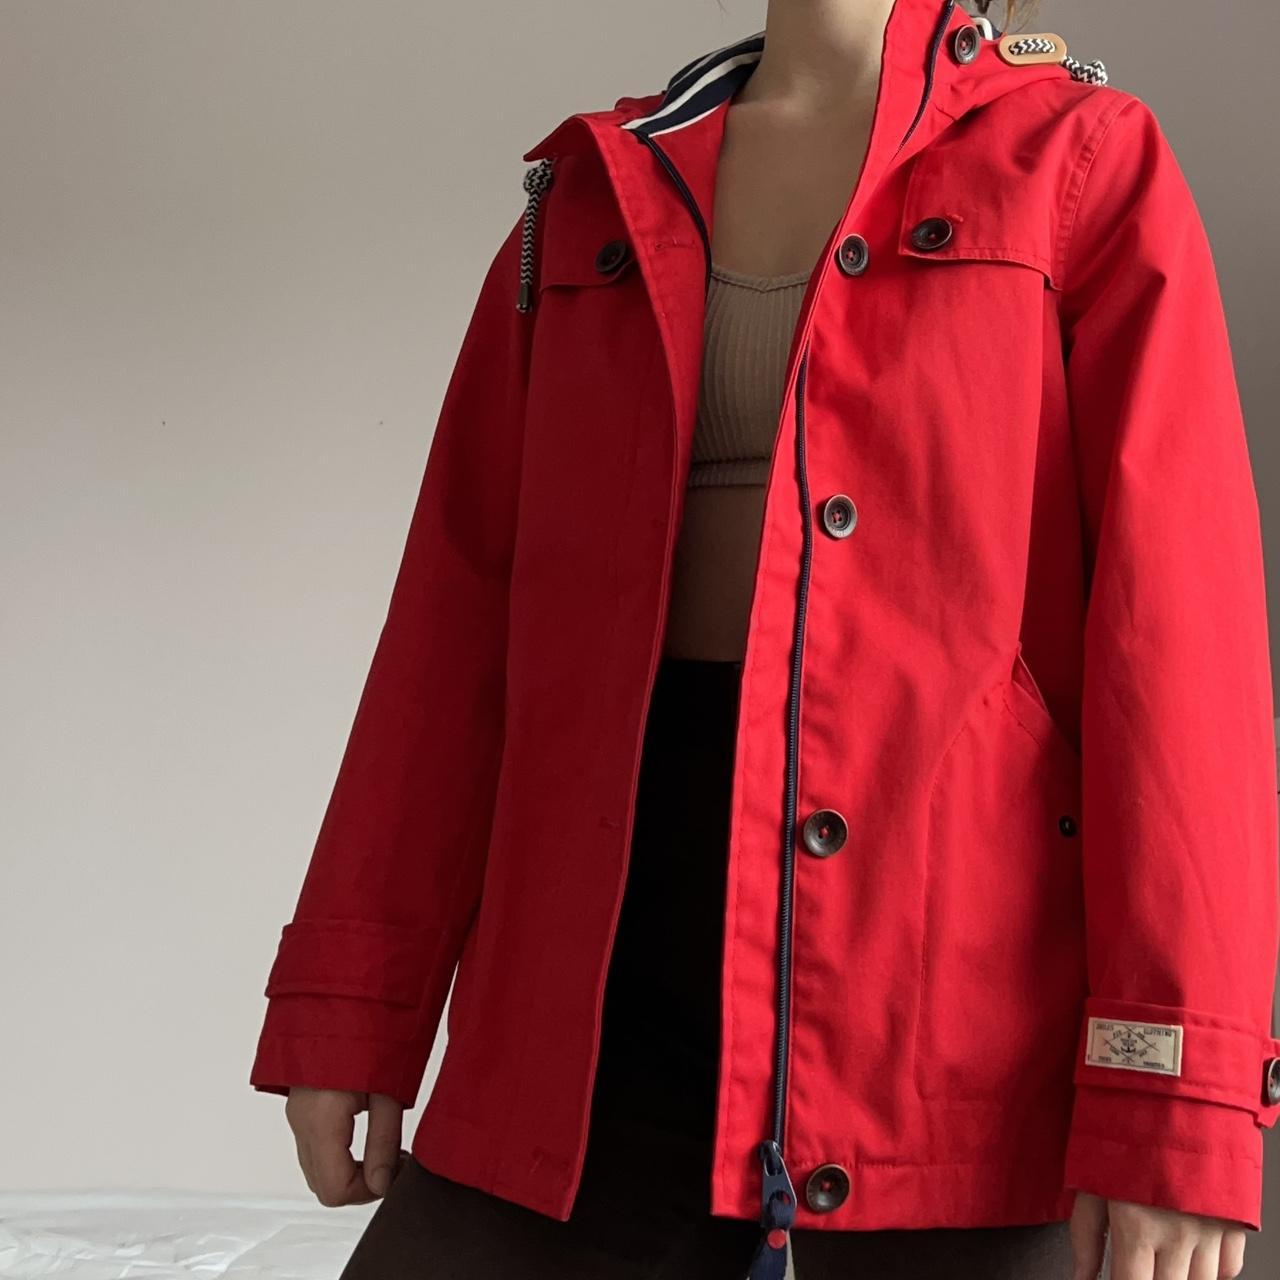 Joules Women's Navy and Red Coat